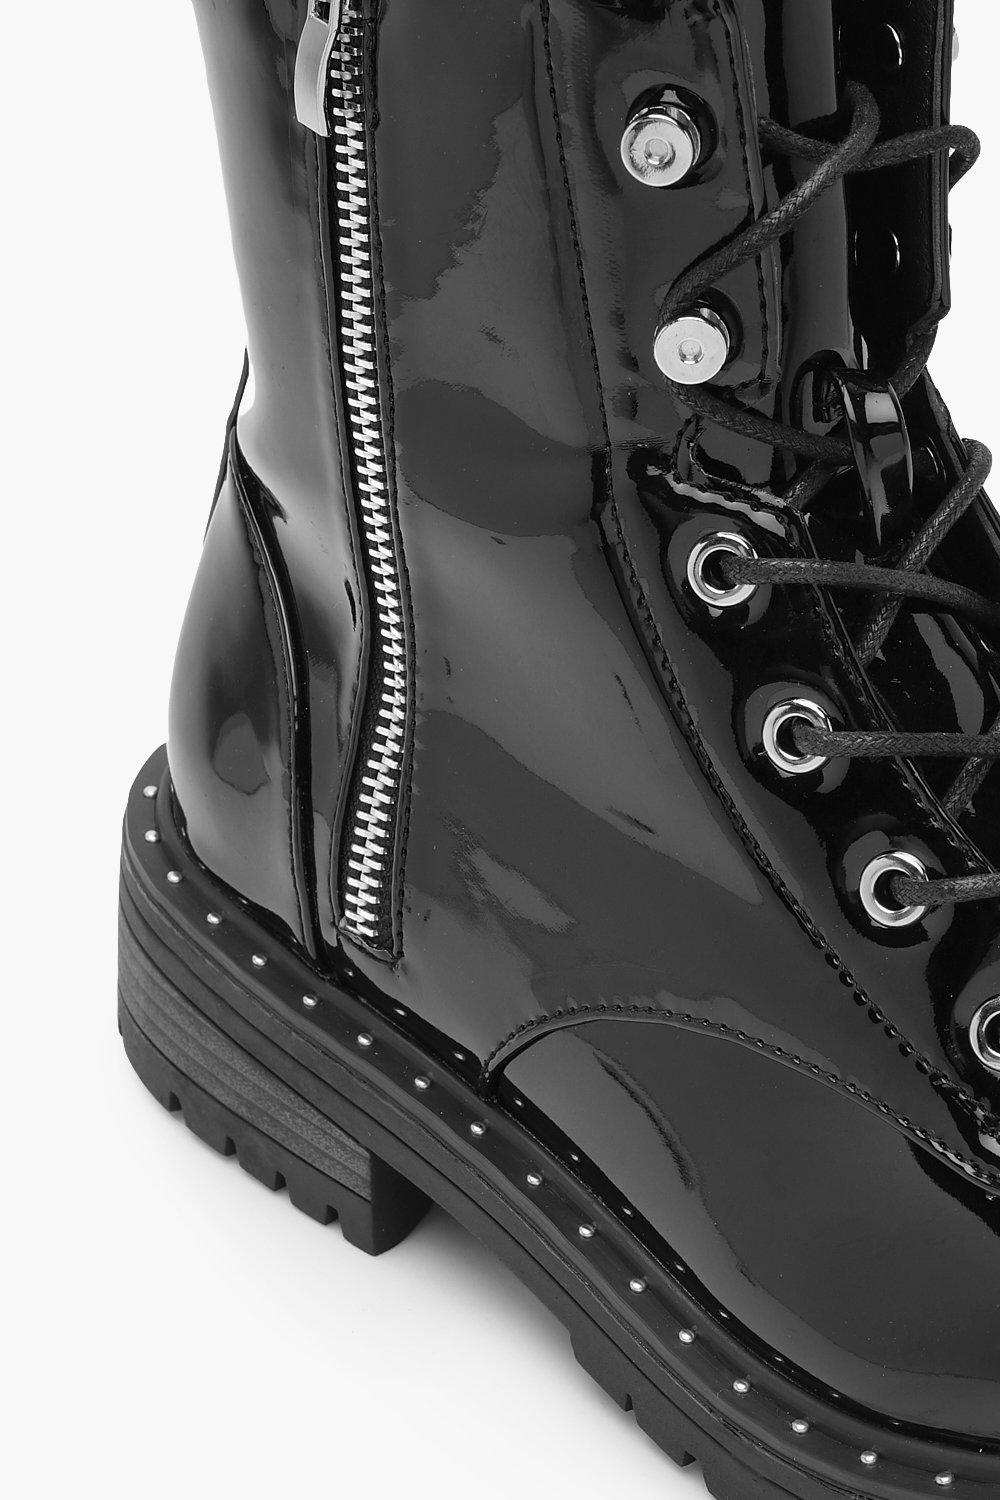 patent hiker boots